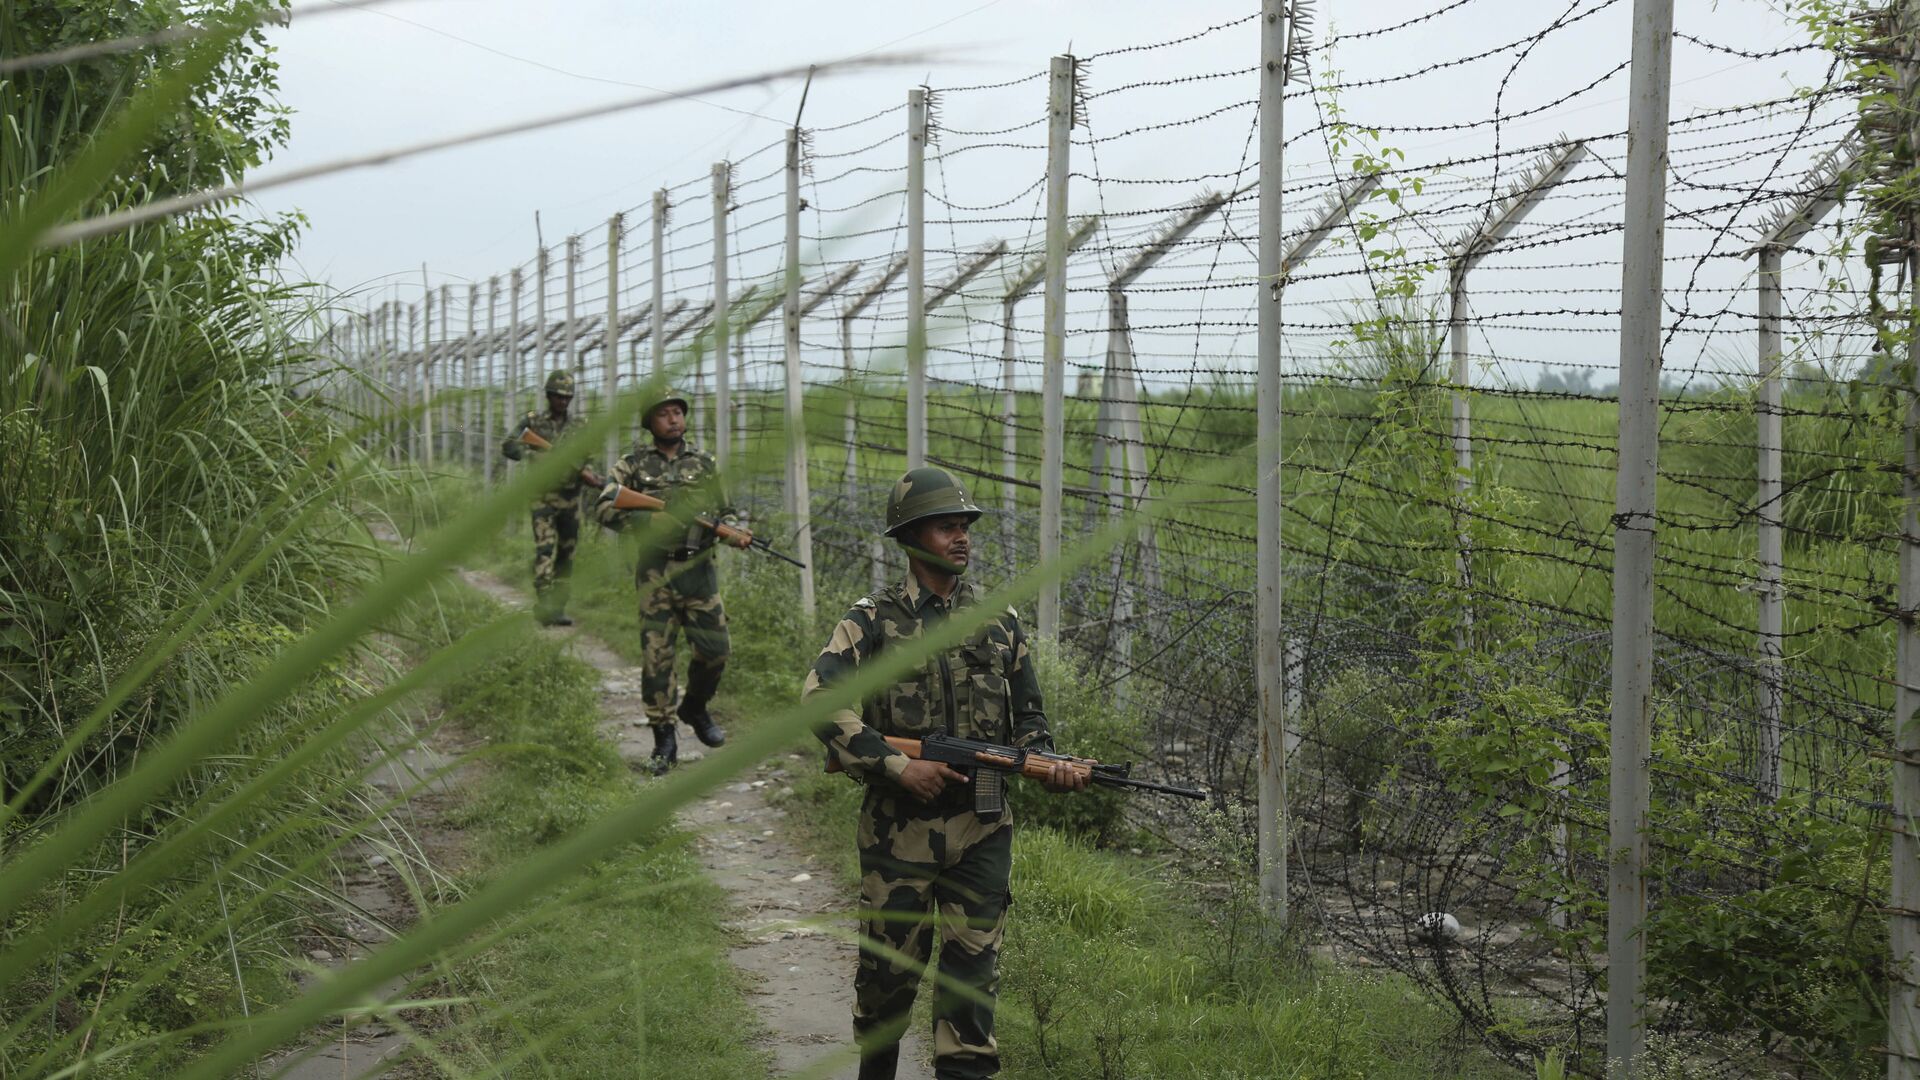 India's Border Security Force (BSF) soldiers patrol near the India Pakistan border fencing at Garkhal in Akhnoor, about 35 kilometers (22 miles) west of Jammu, India, Tuesday, Aug.13, 2019 - Sputnik International, 1920, 03.10.2021